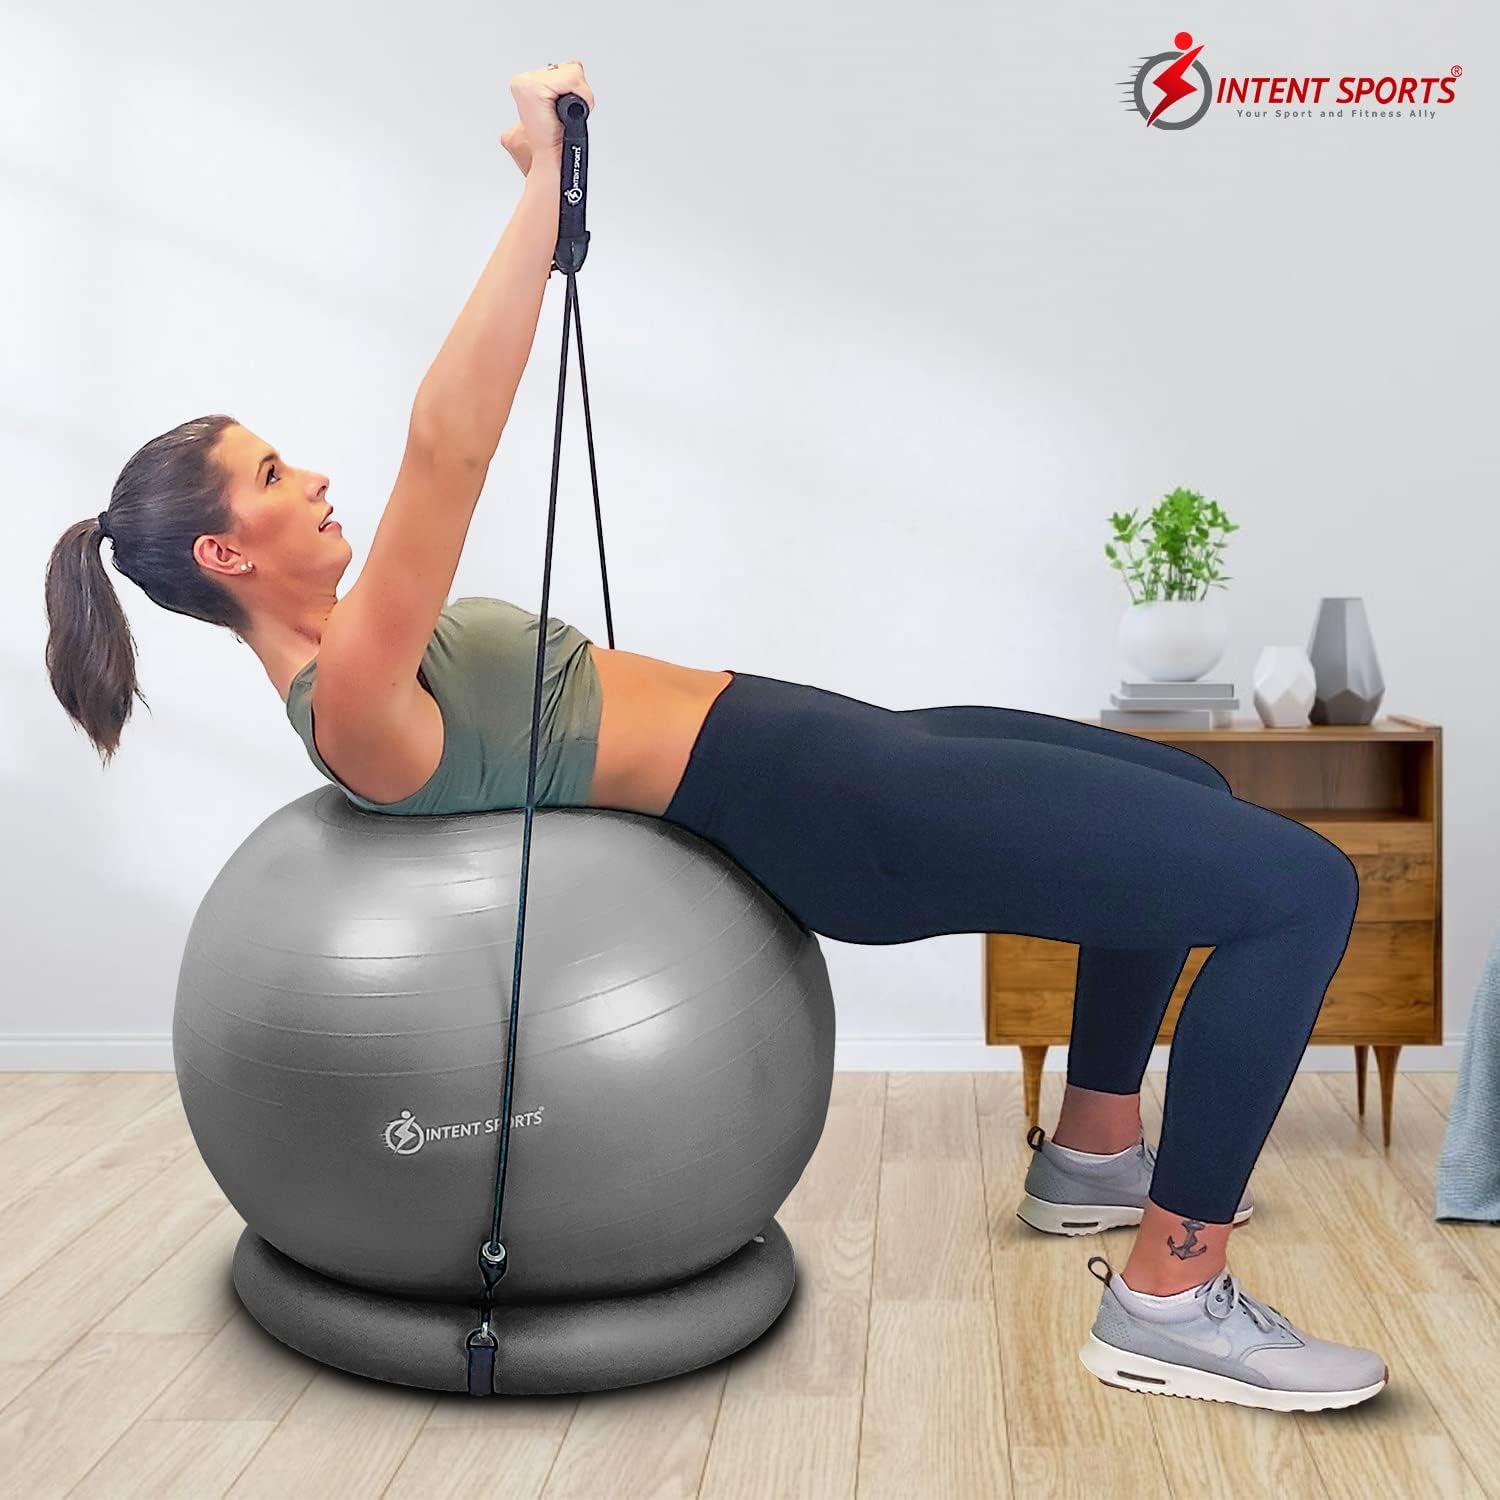 Yoga Ball Chair – Stability Ball with Inflatable Stability Base & Resistance Bands, Fitness Ball for Home Gym, Office, Improves Back Pain, Core, Posture & Balance (65 Cm)